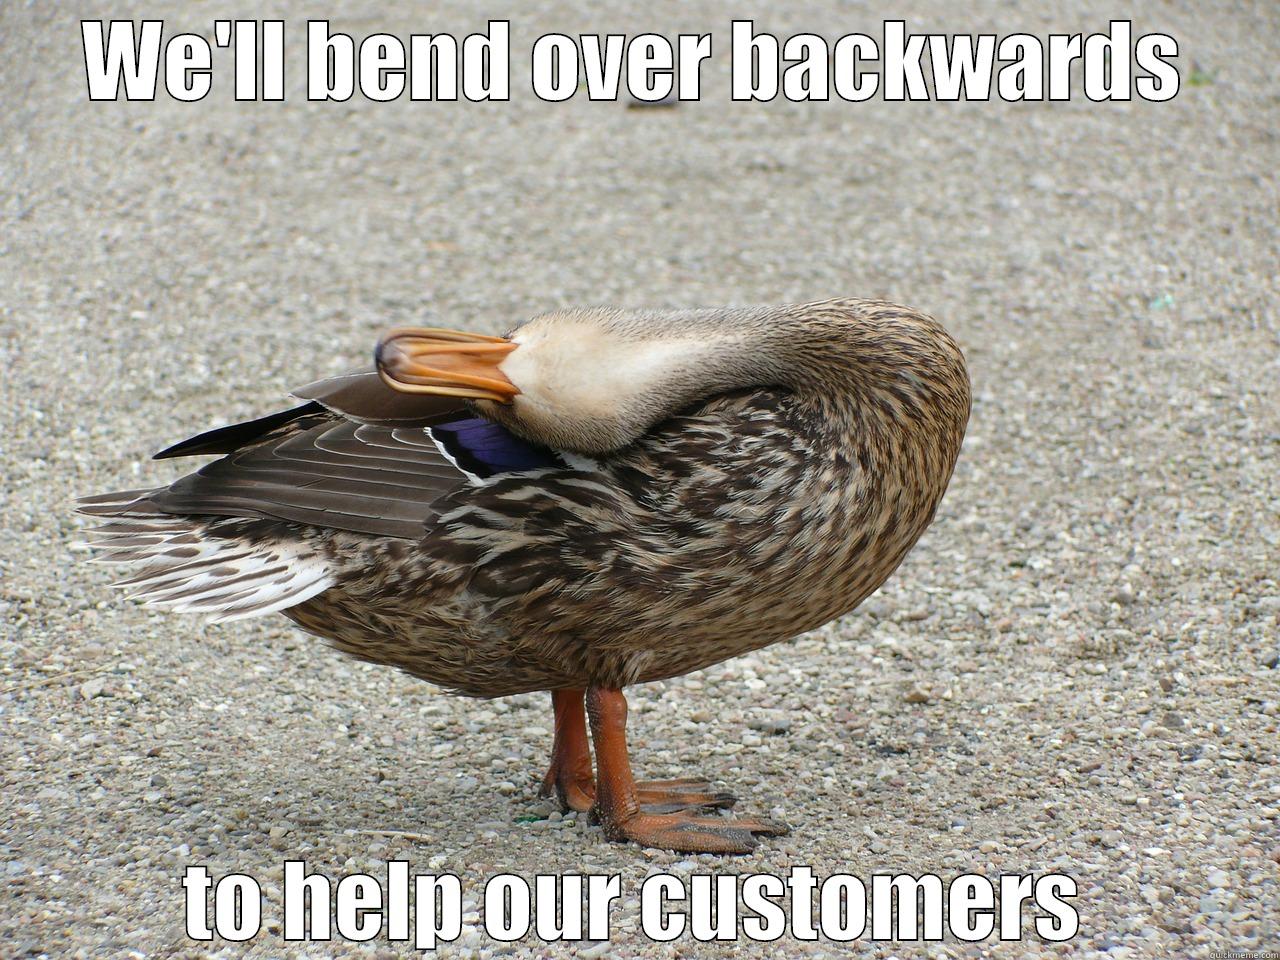 Bend over backwards - WE'LL BEND OVER BACKWARDS TO HELP OUR CUSTOMERS Misc